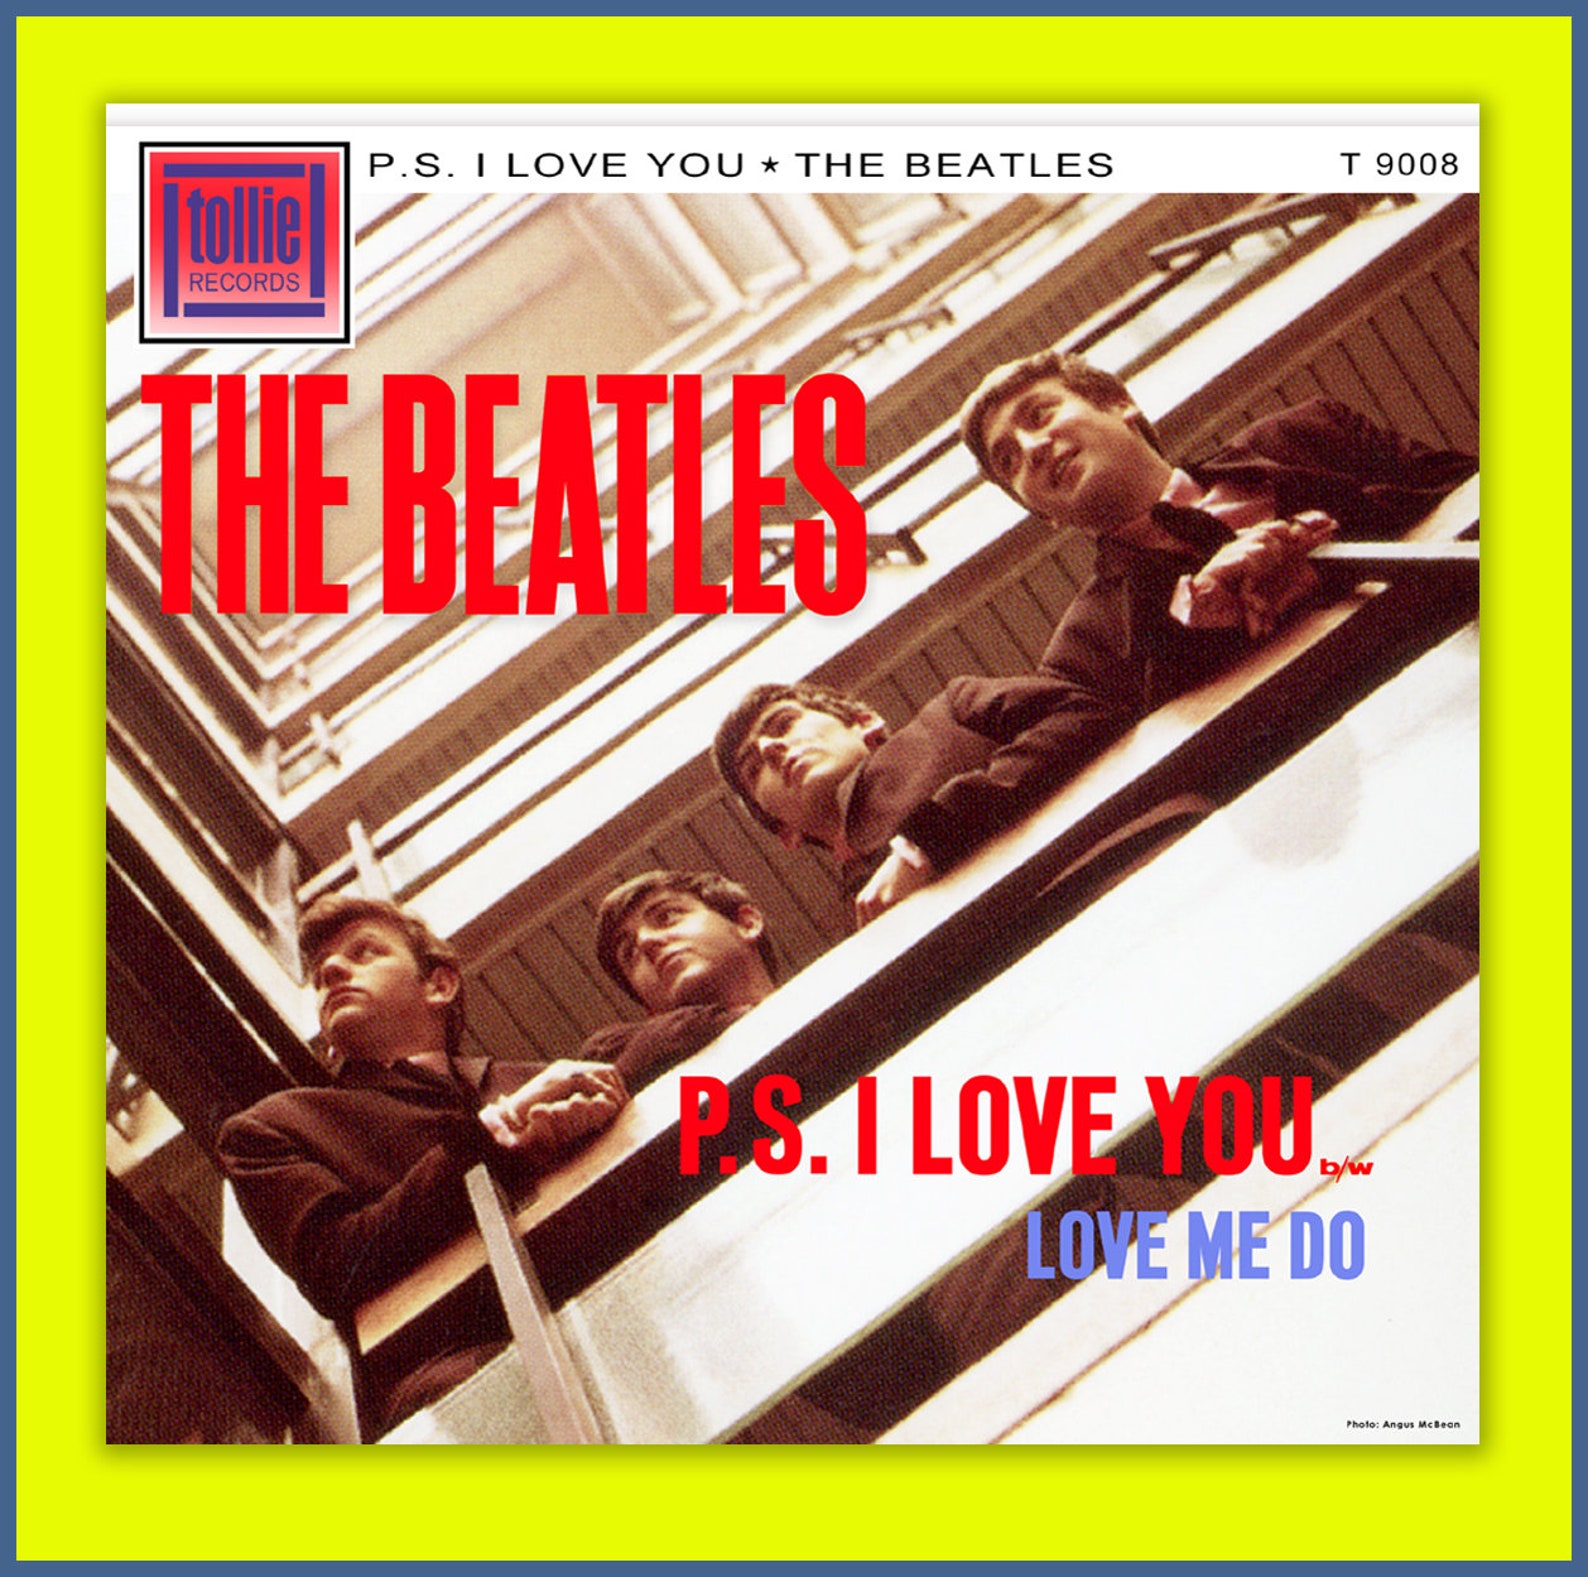 THE BEATLES Love Me Do B/w P.S. I Love You Tollie Fantasy - Etsy